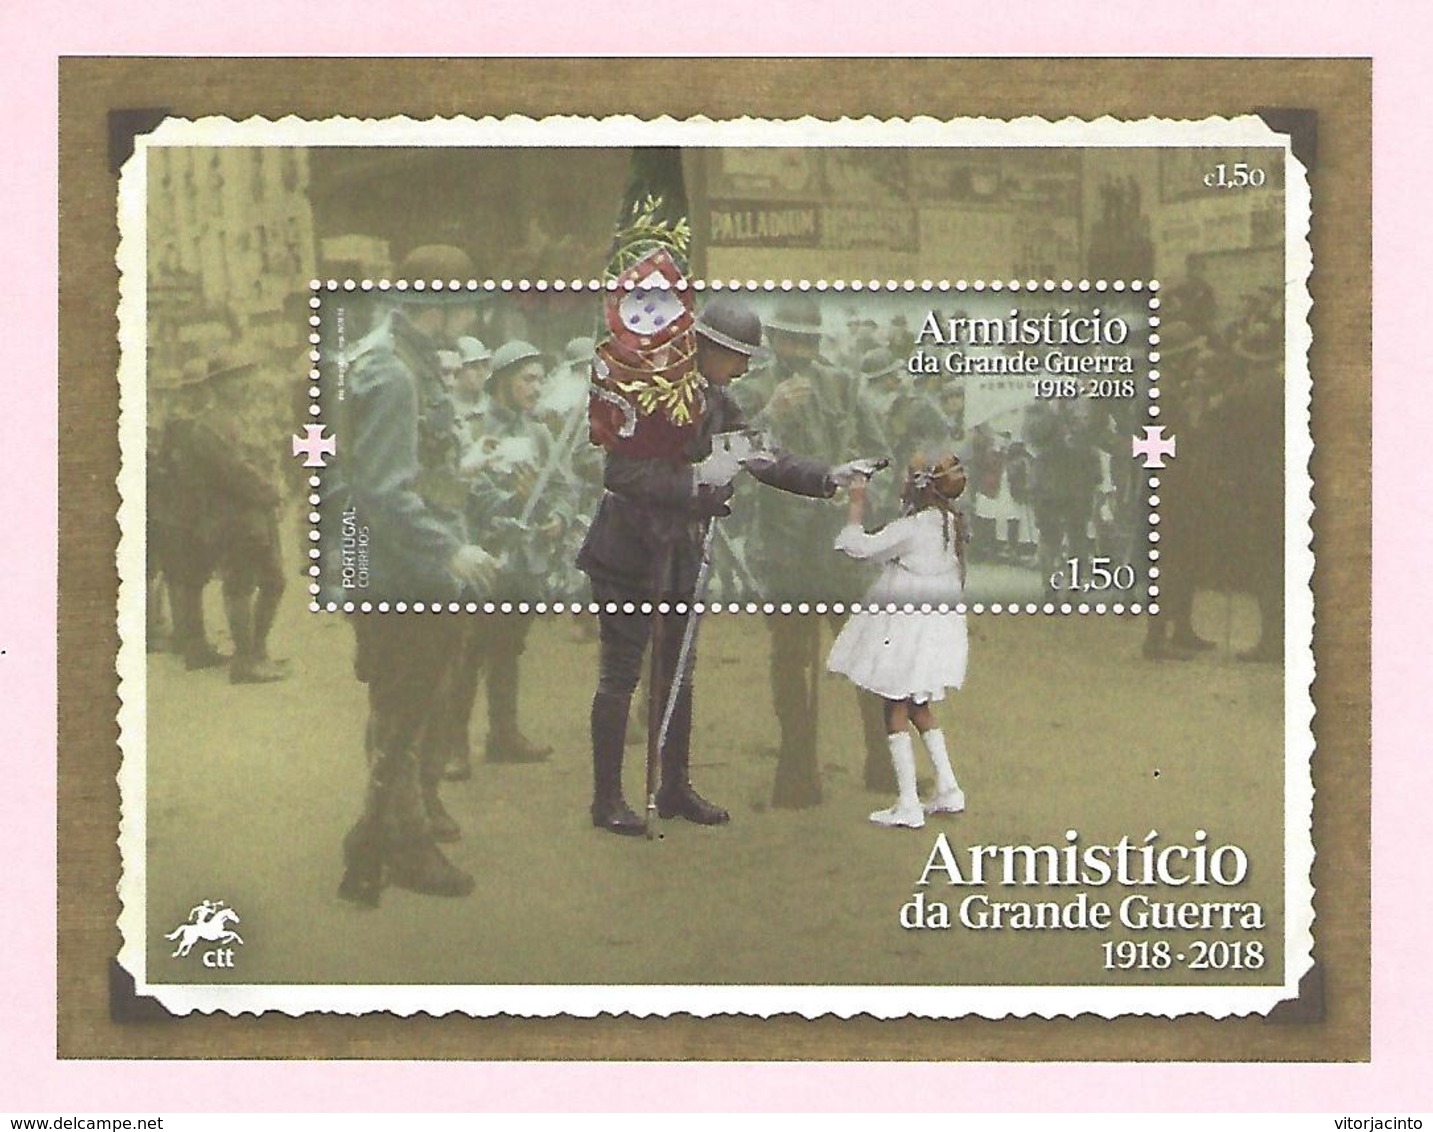 WW1 - Centenary Of The Armistice Of The Great War (1918-2018) - PORTUGAL - Souvenir Sheet And Printed Color Proof - Guerre Mondiale (Première)